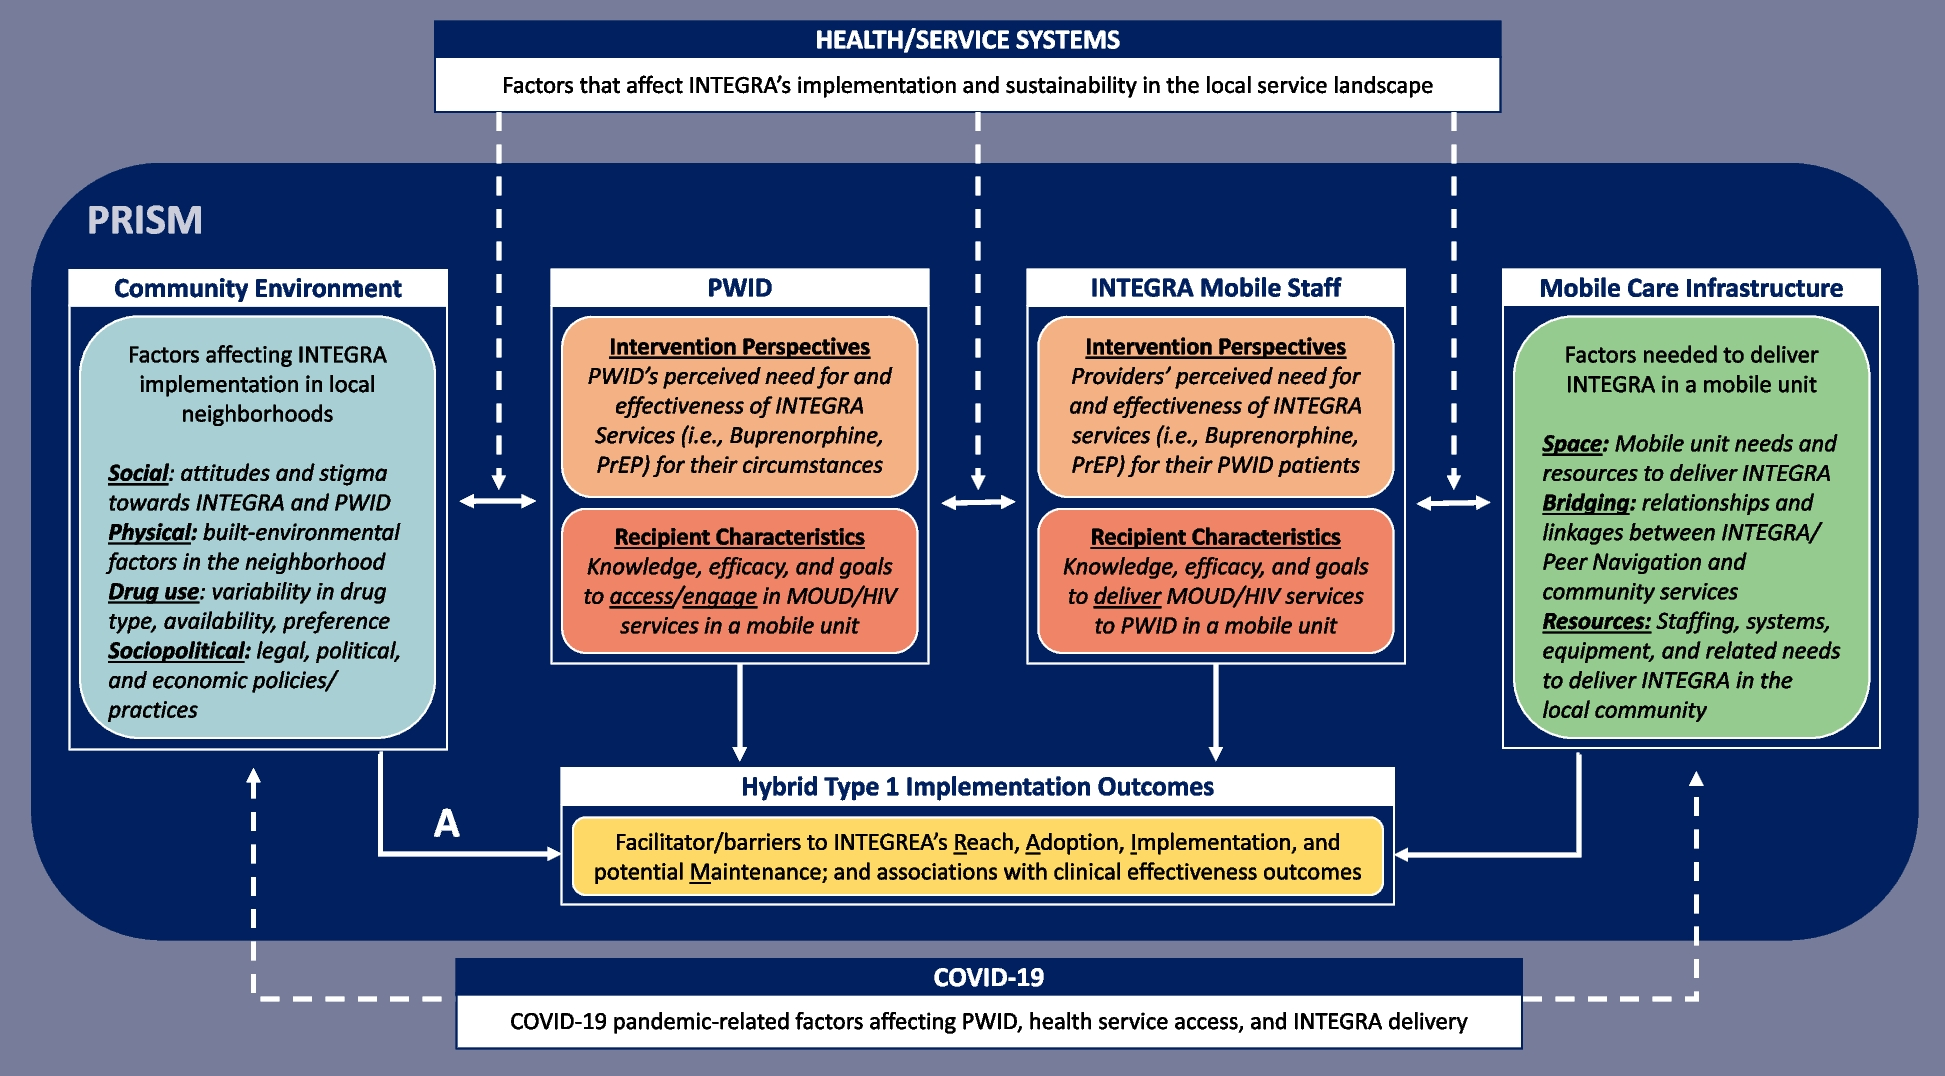 A data-driven approach to implementing the HPTN 094 complex intervention INTEGRA in local communities